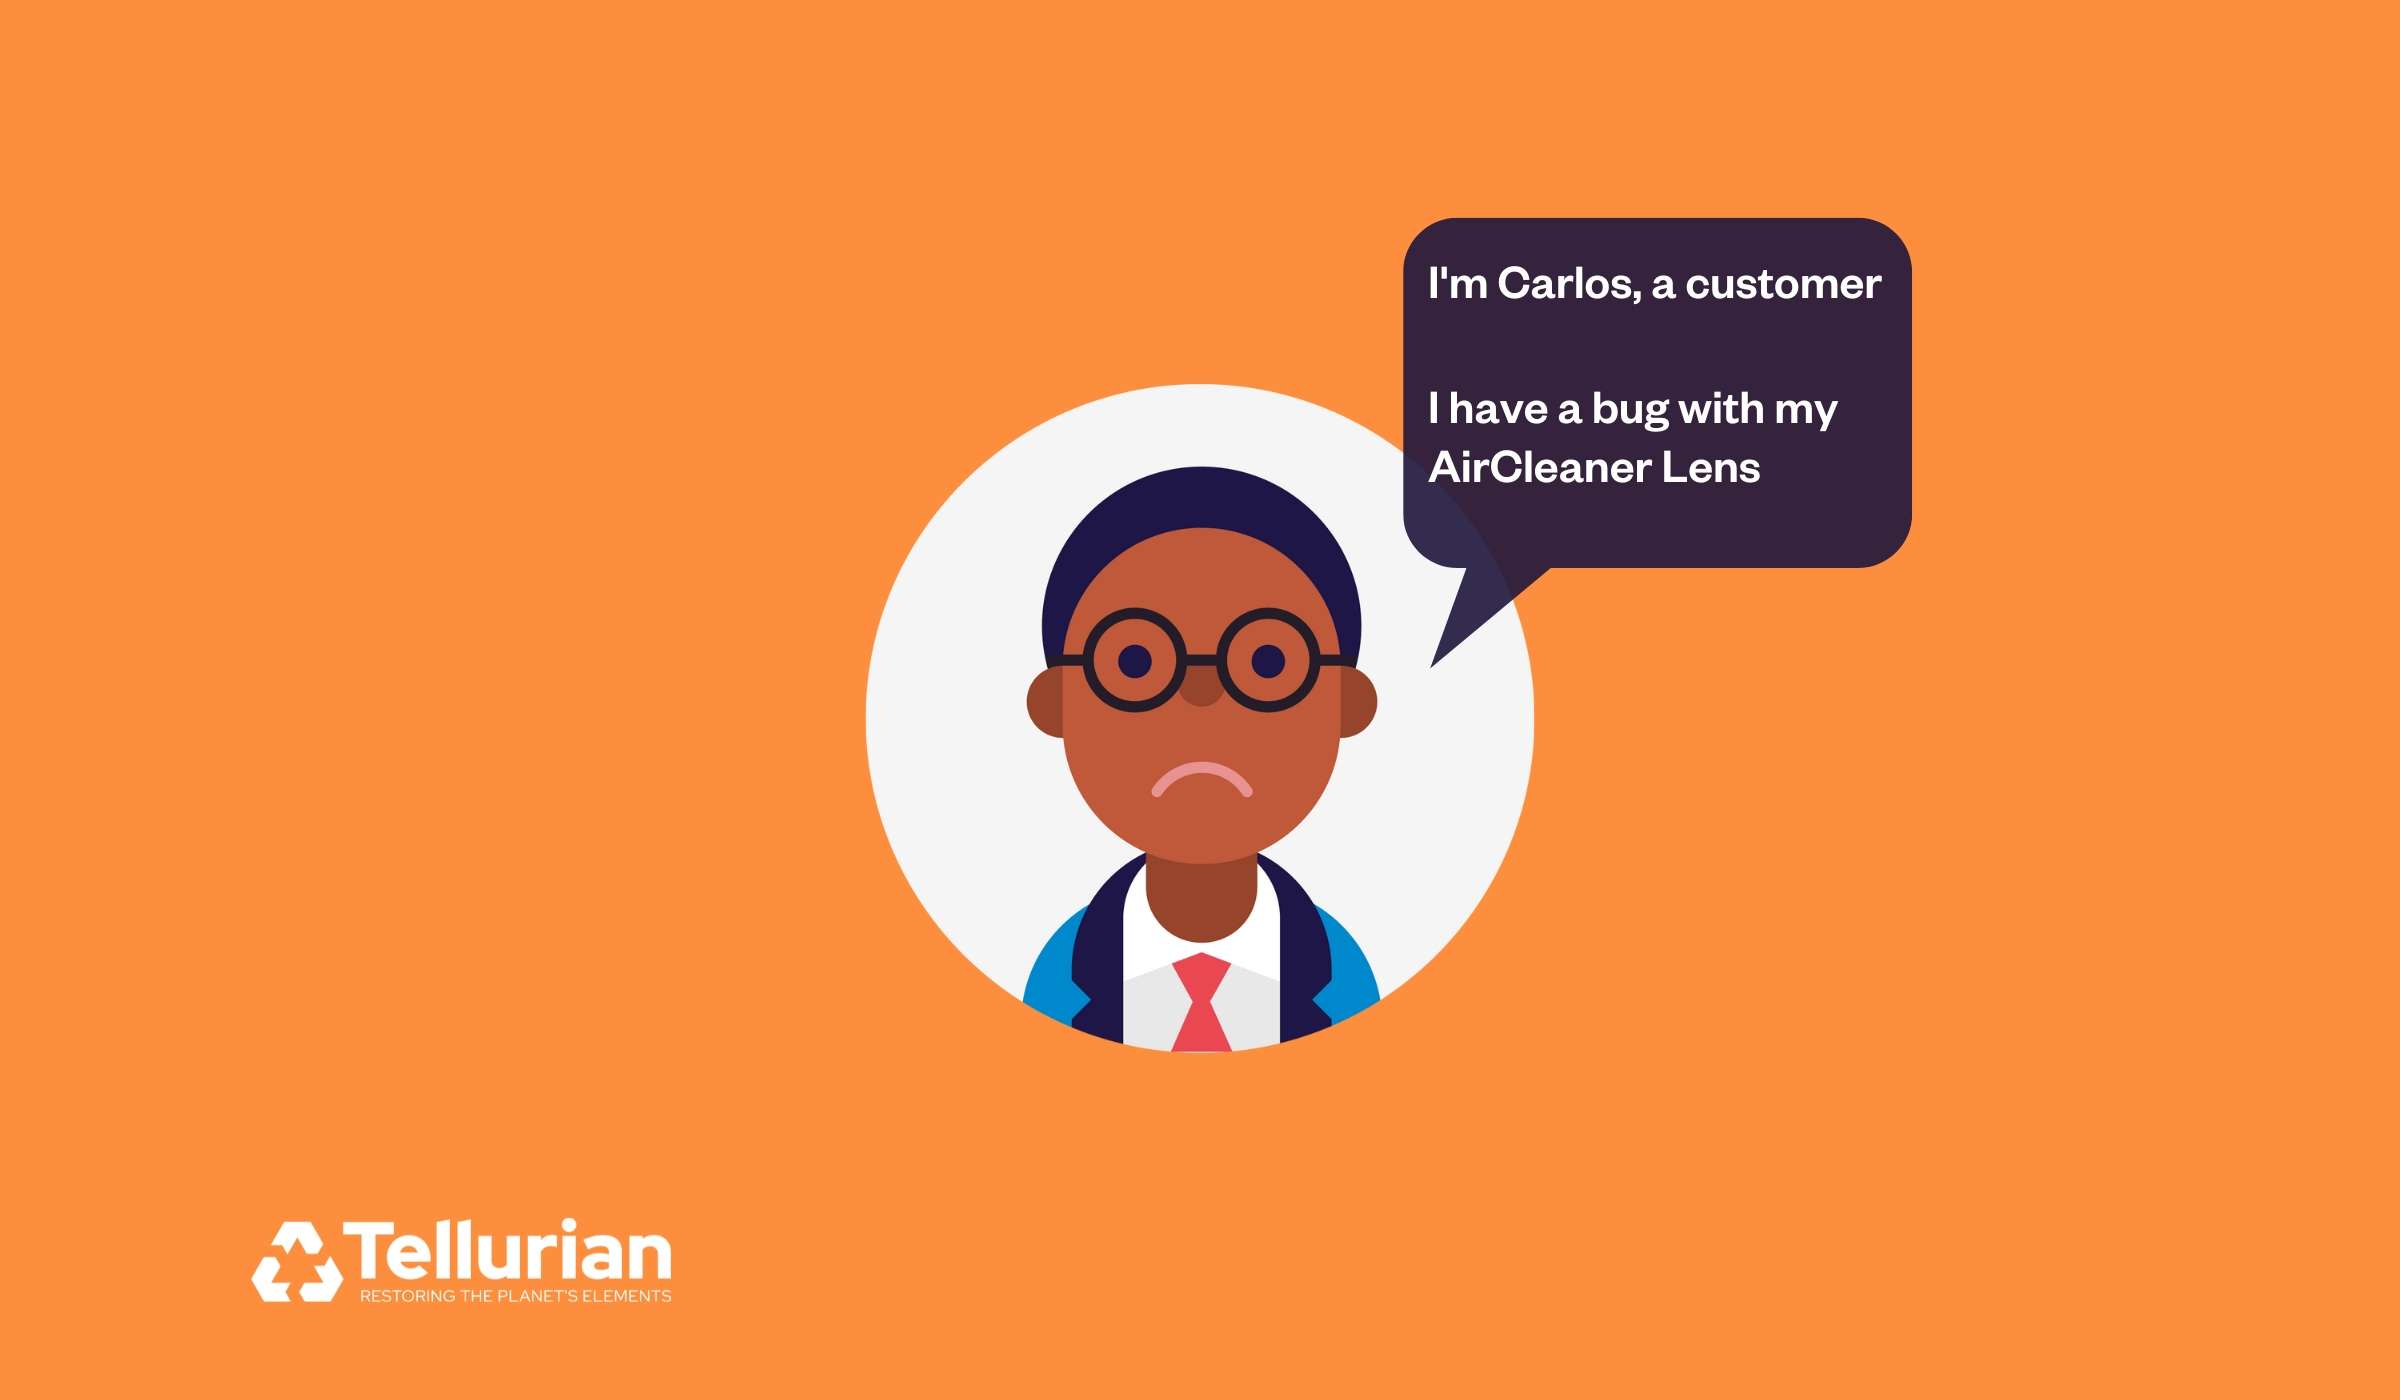 Meet Carlos, a Tellurian customer, who has an issue with his AirCleaner lens. He's going to raise a ticket on Tellurian Support Portal to ask for help.